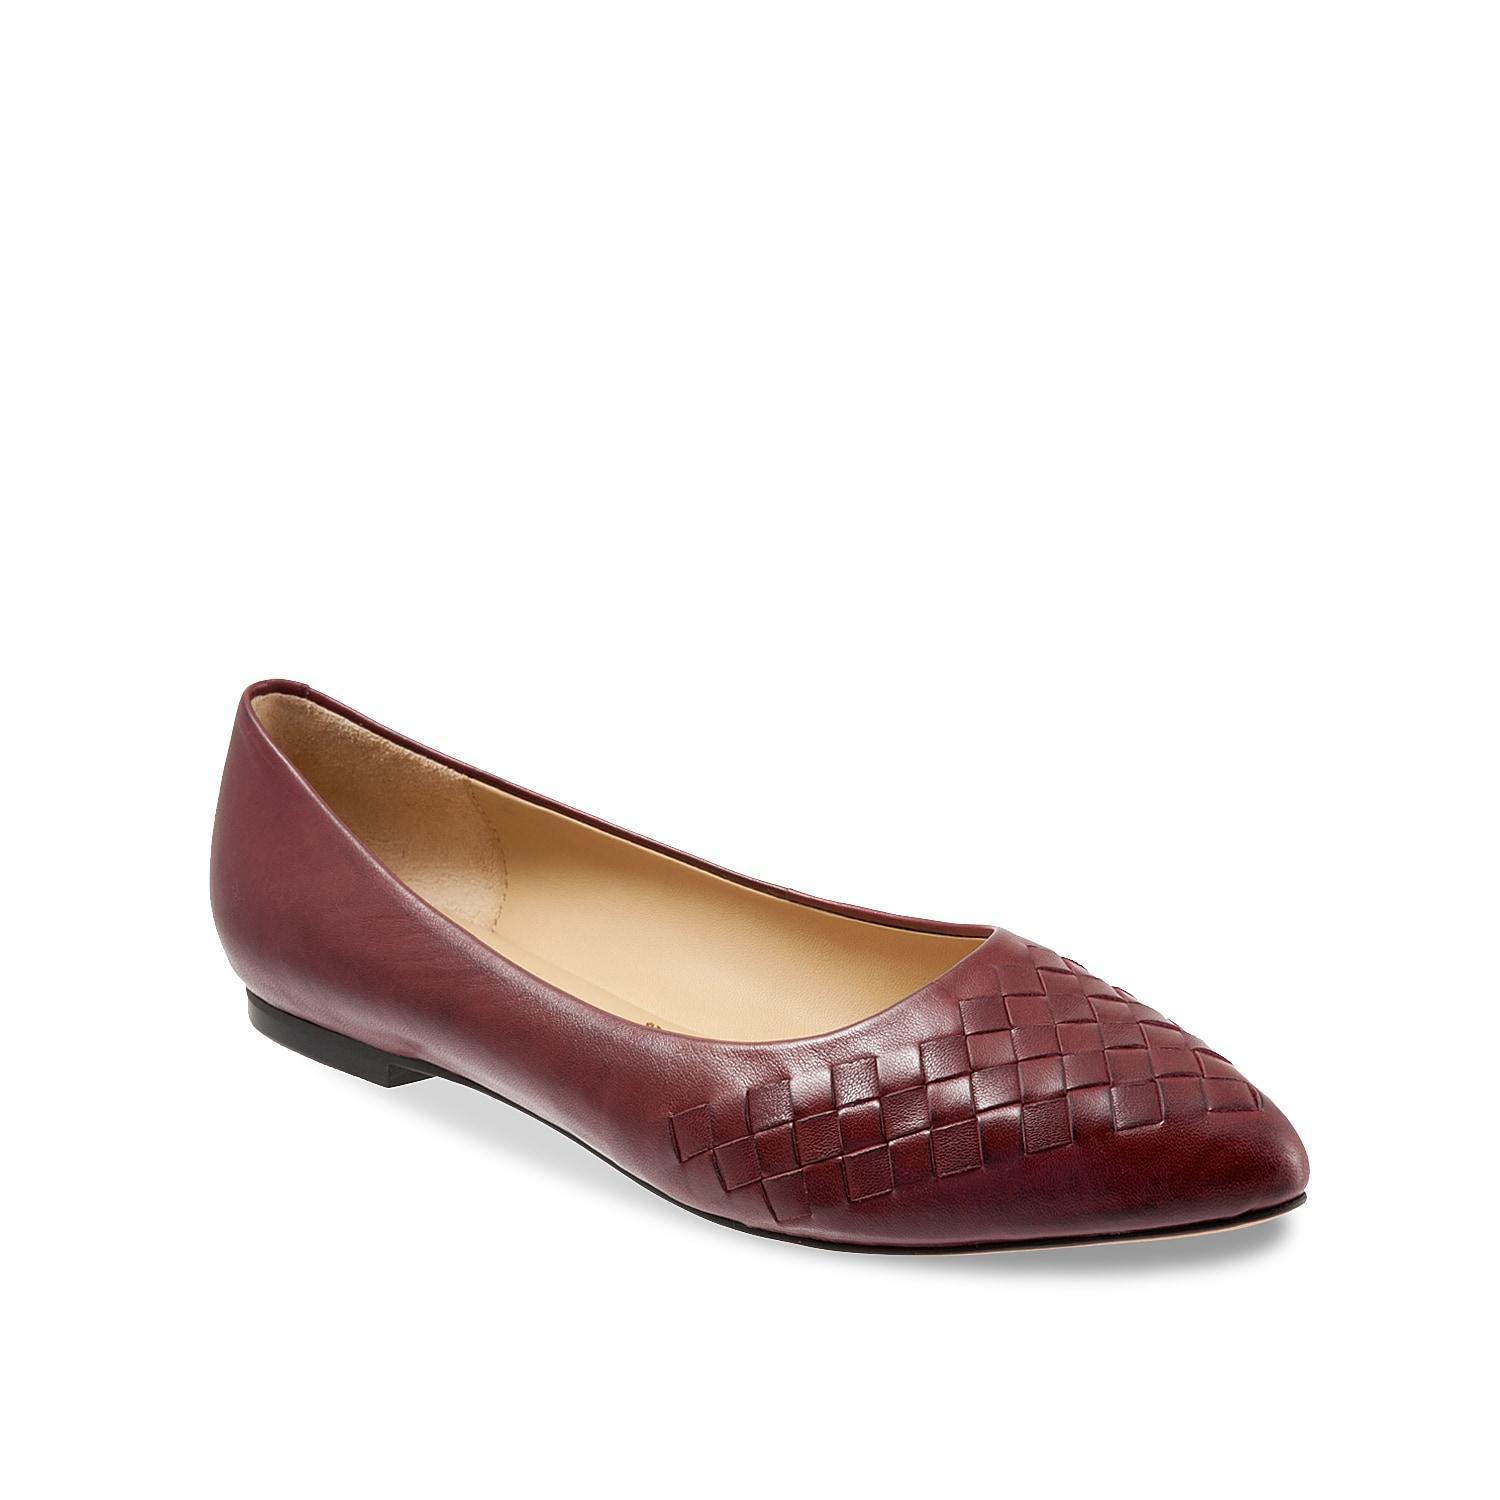 Trotters Estee Woven Flat Product Image